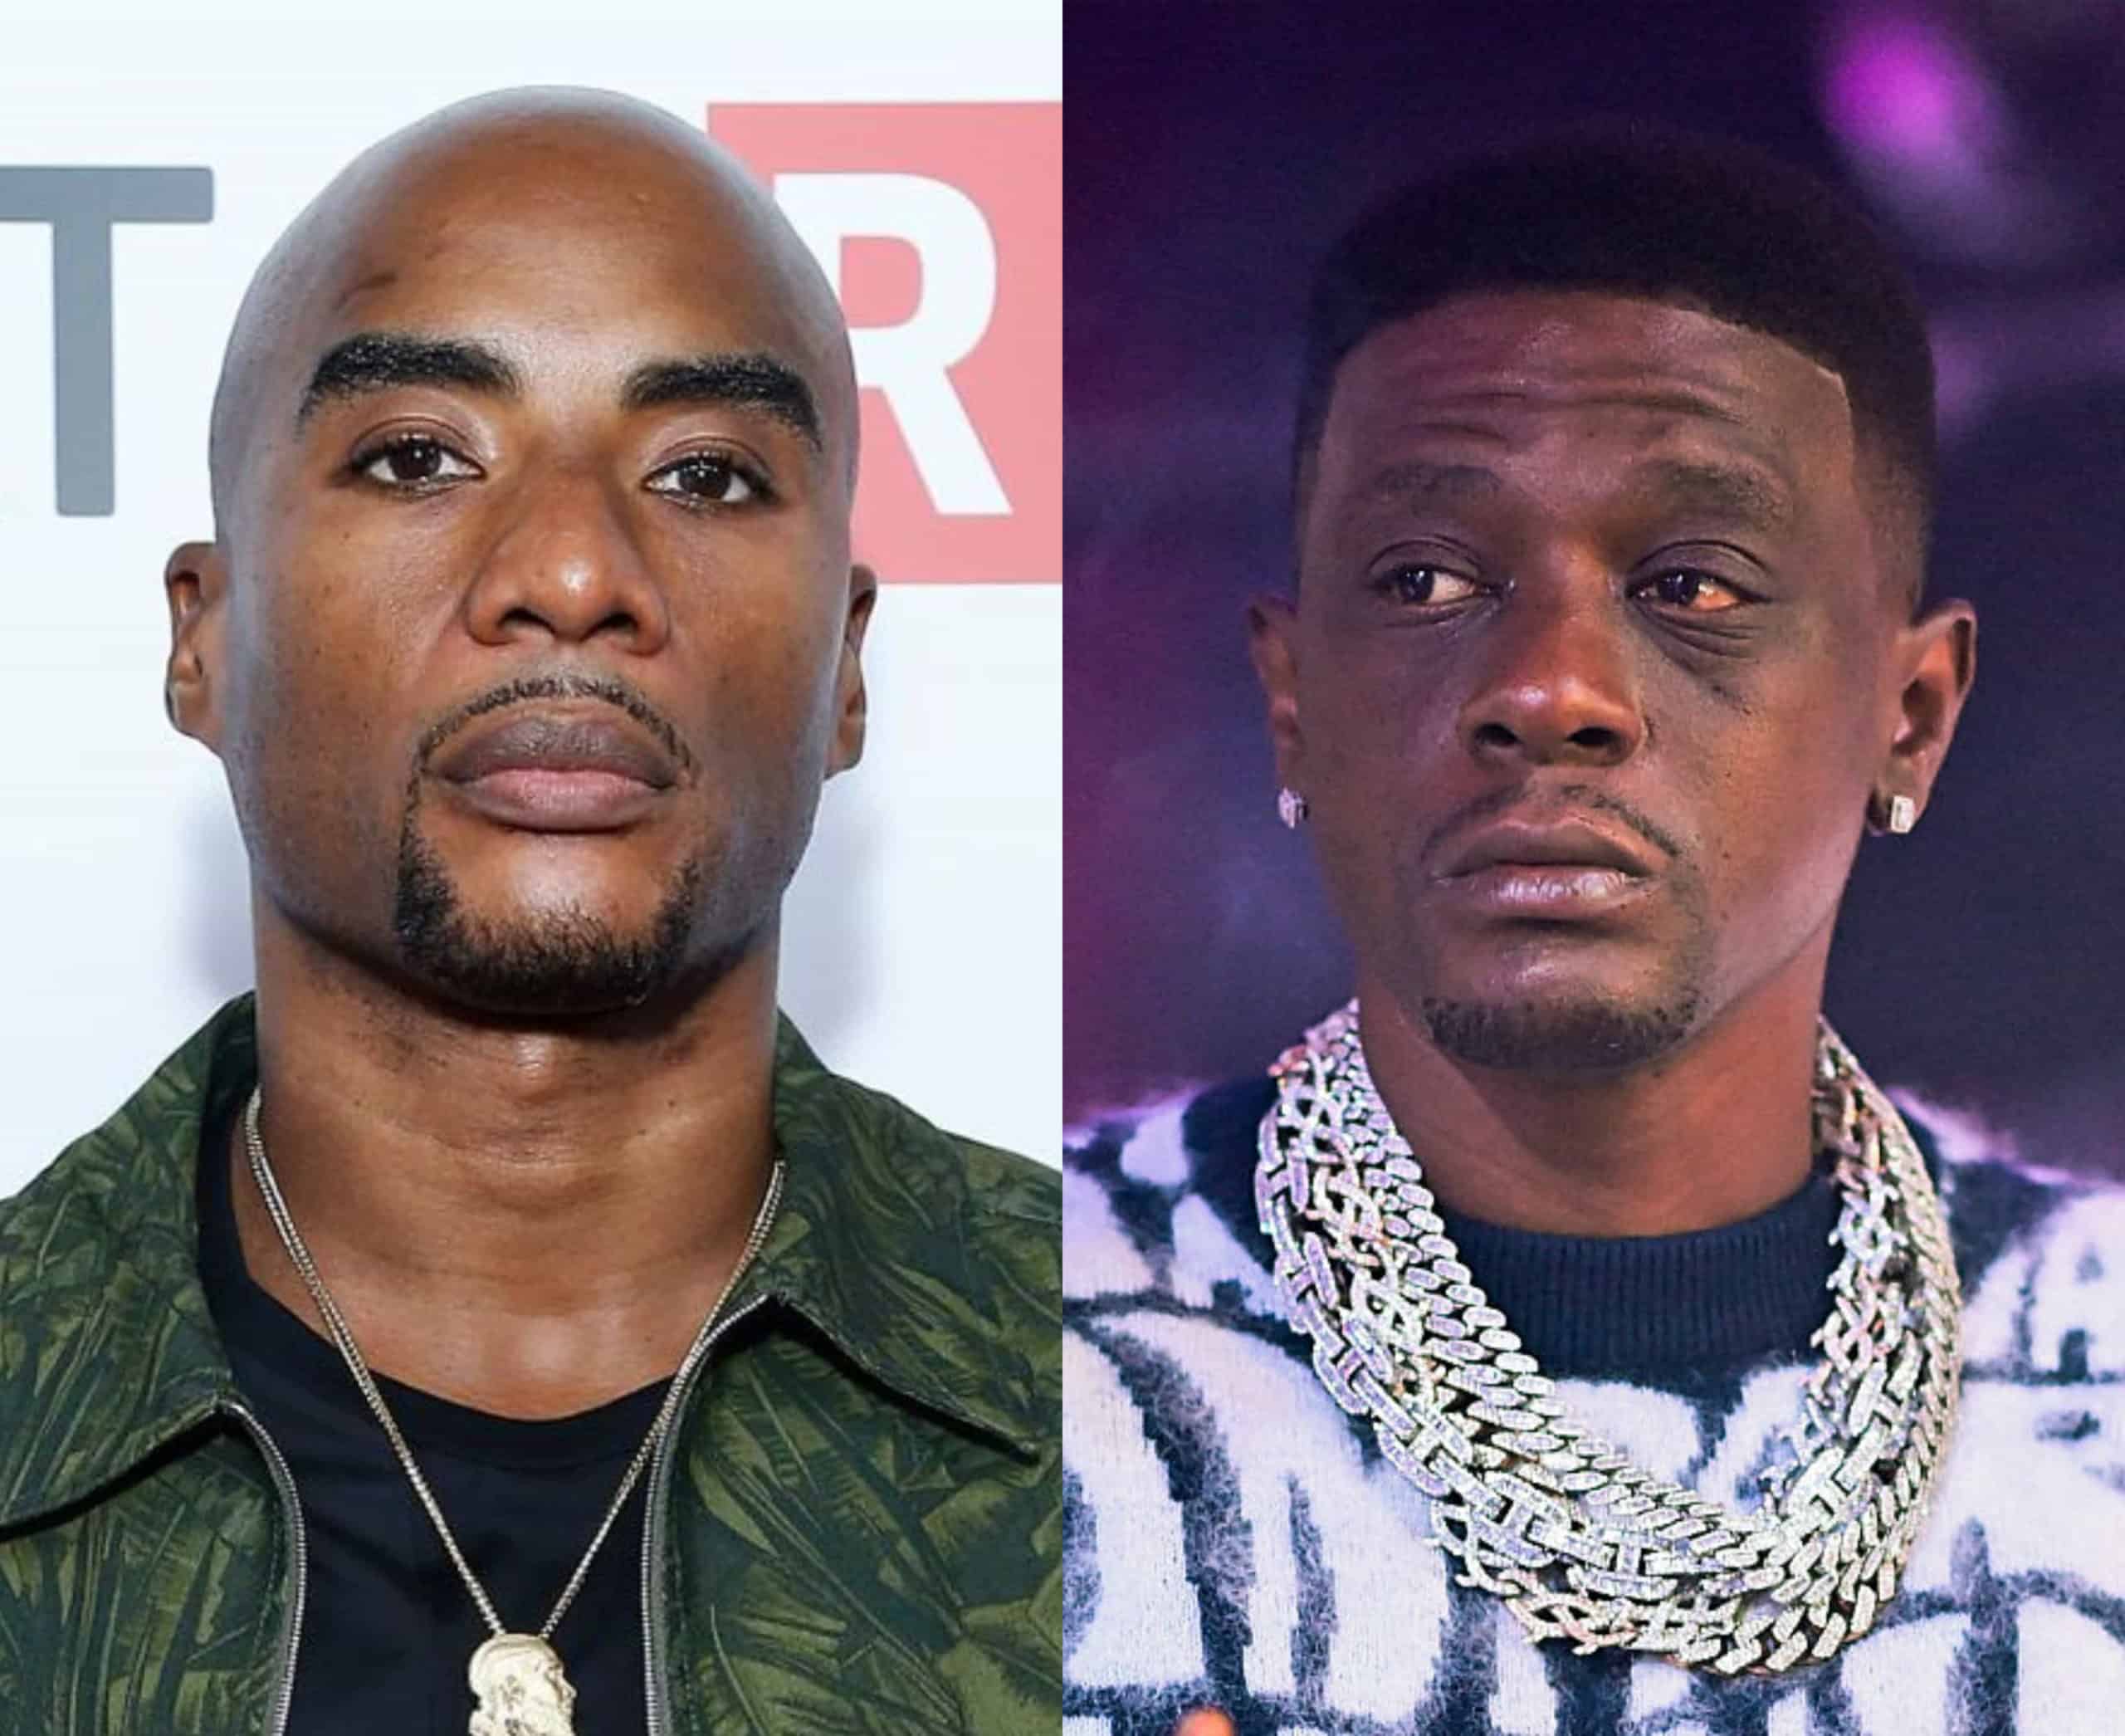 Charlamagne Tha God Responds To Boosie Badazz Calling Him Out For Supporting Lil Nas X